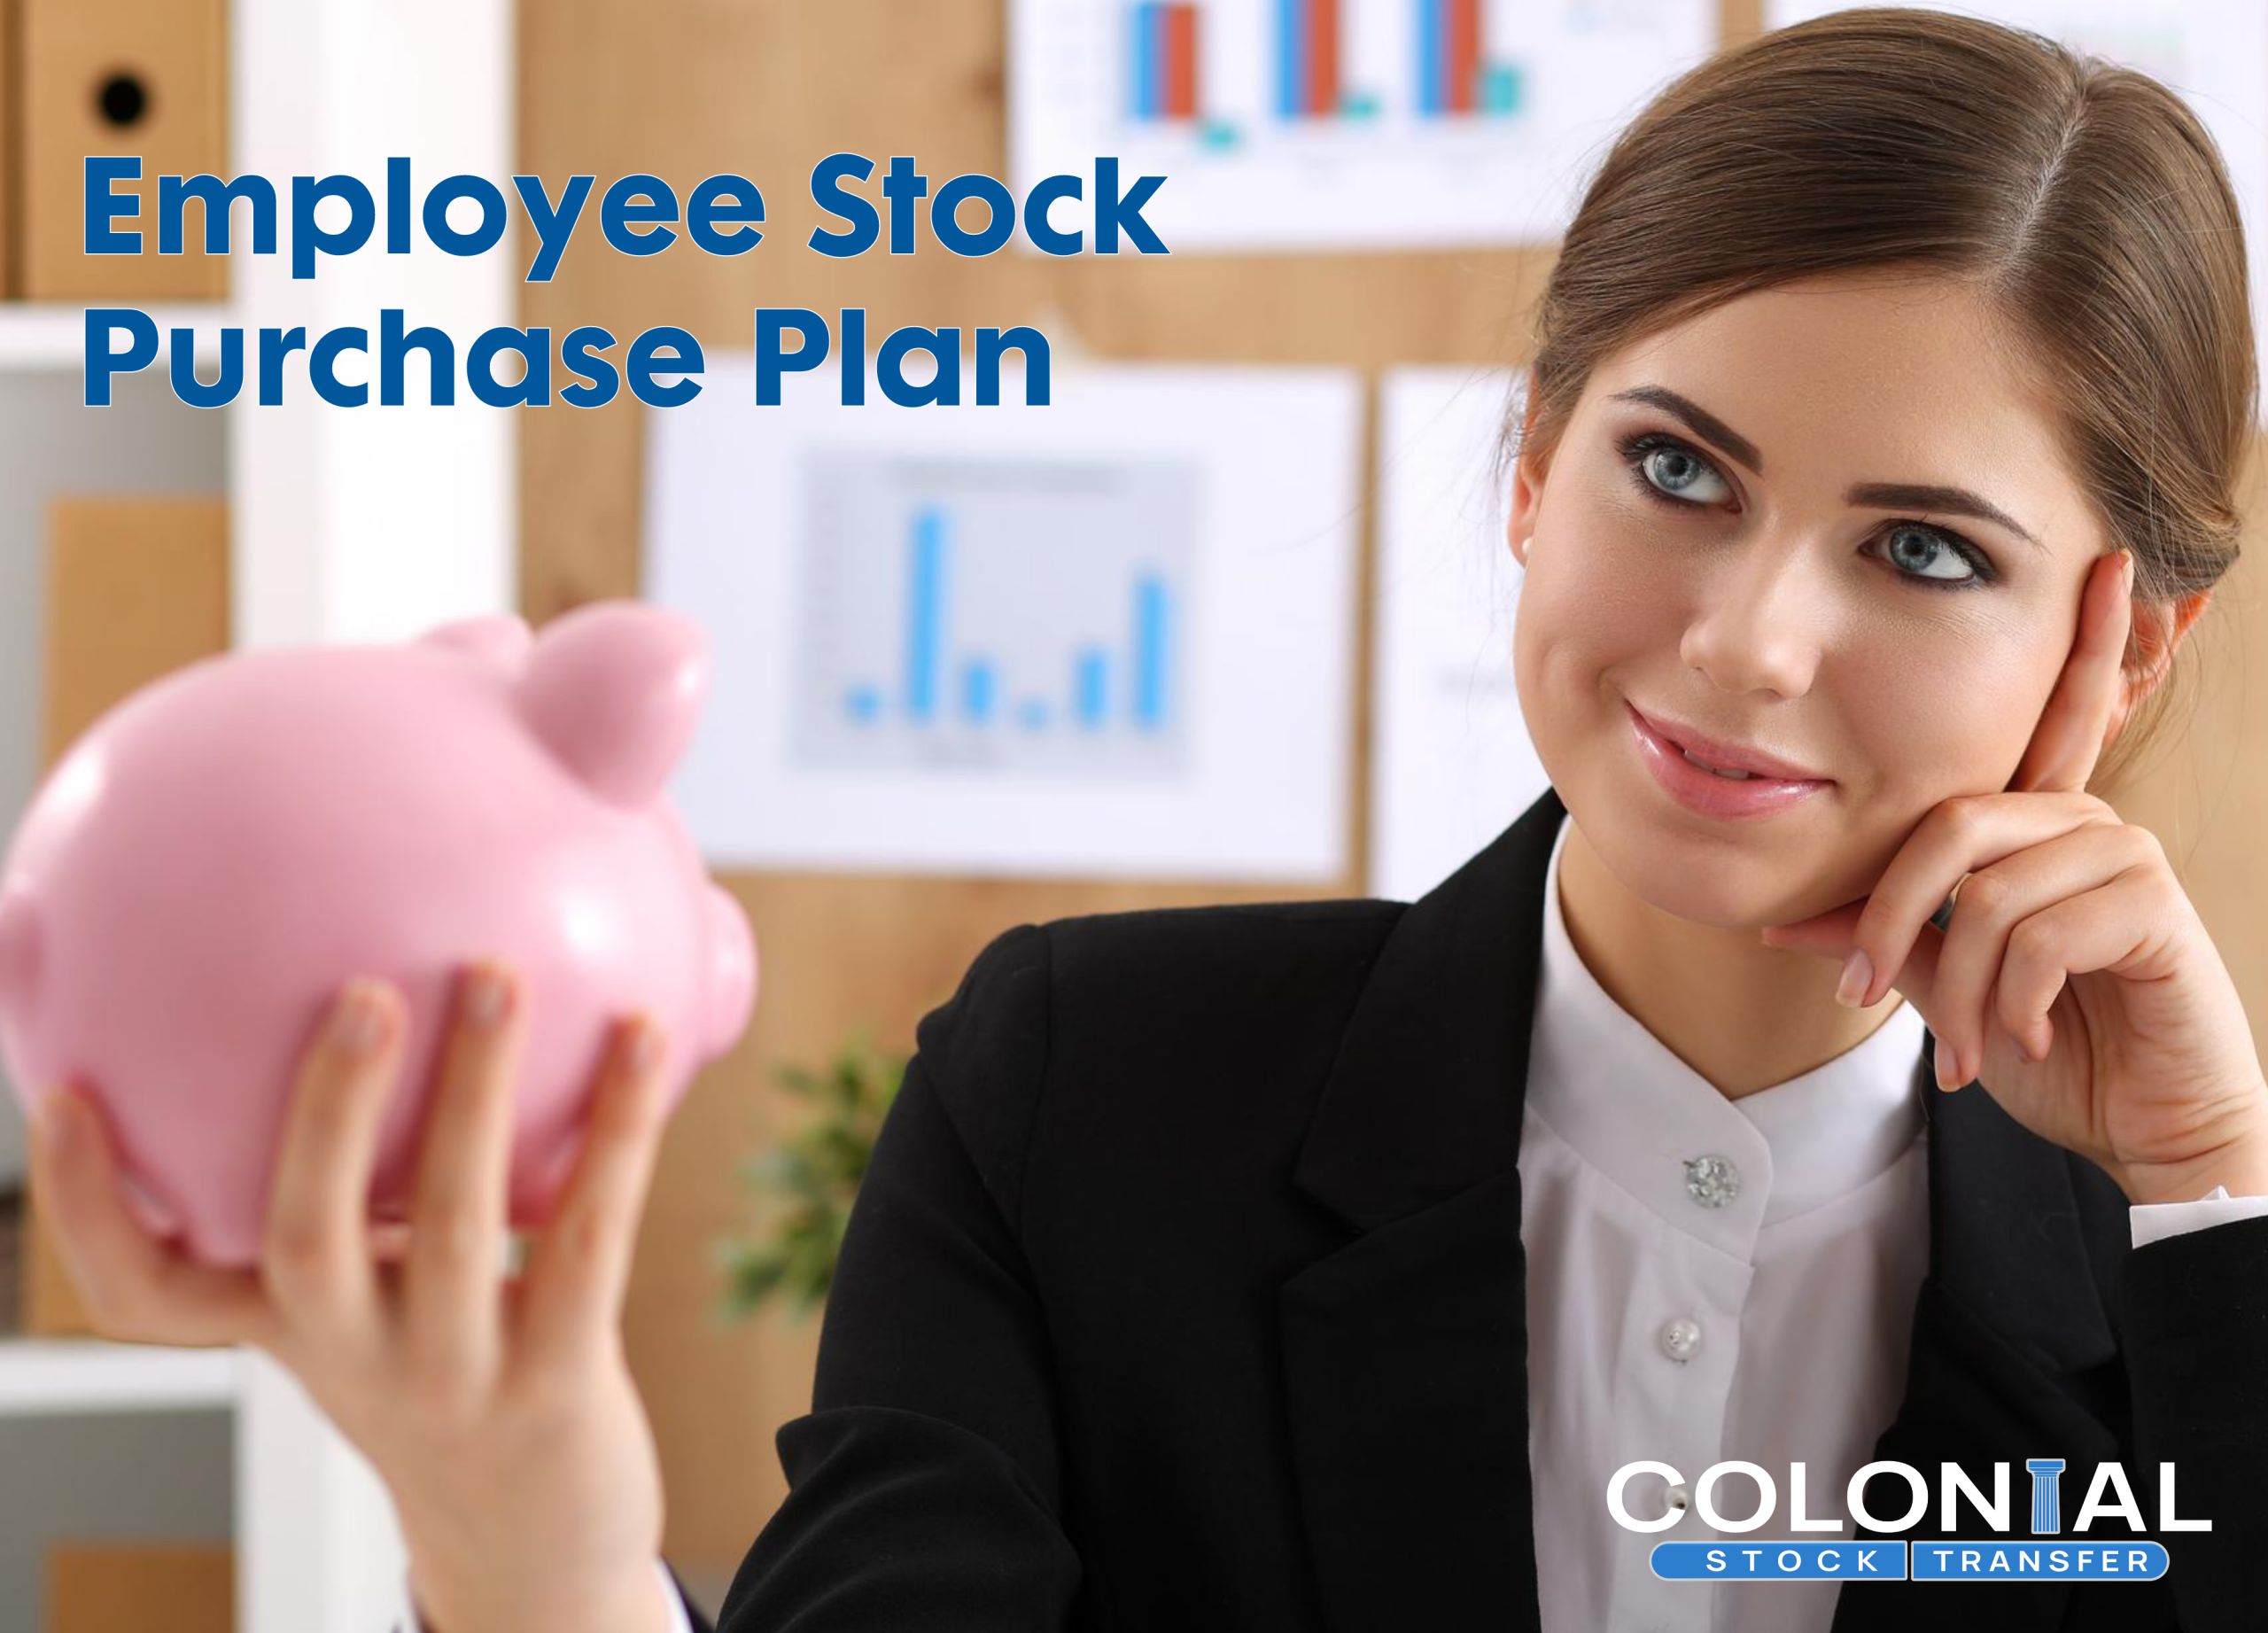 What Are the Benefits of an Employee Stock Purchase Plan for Issuers?